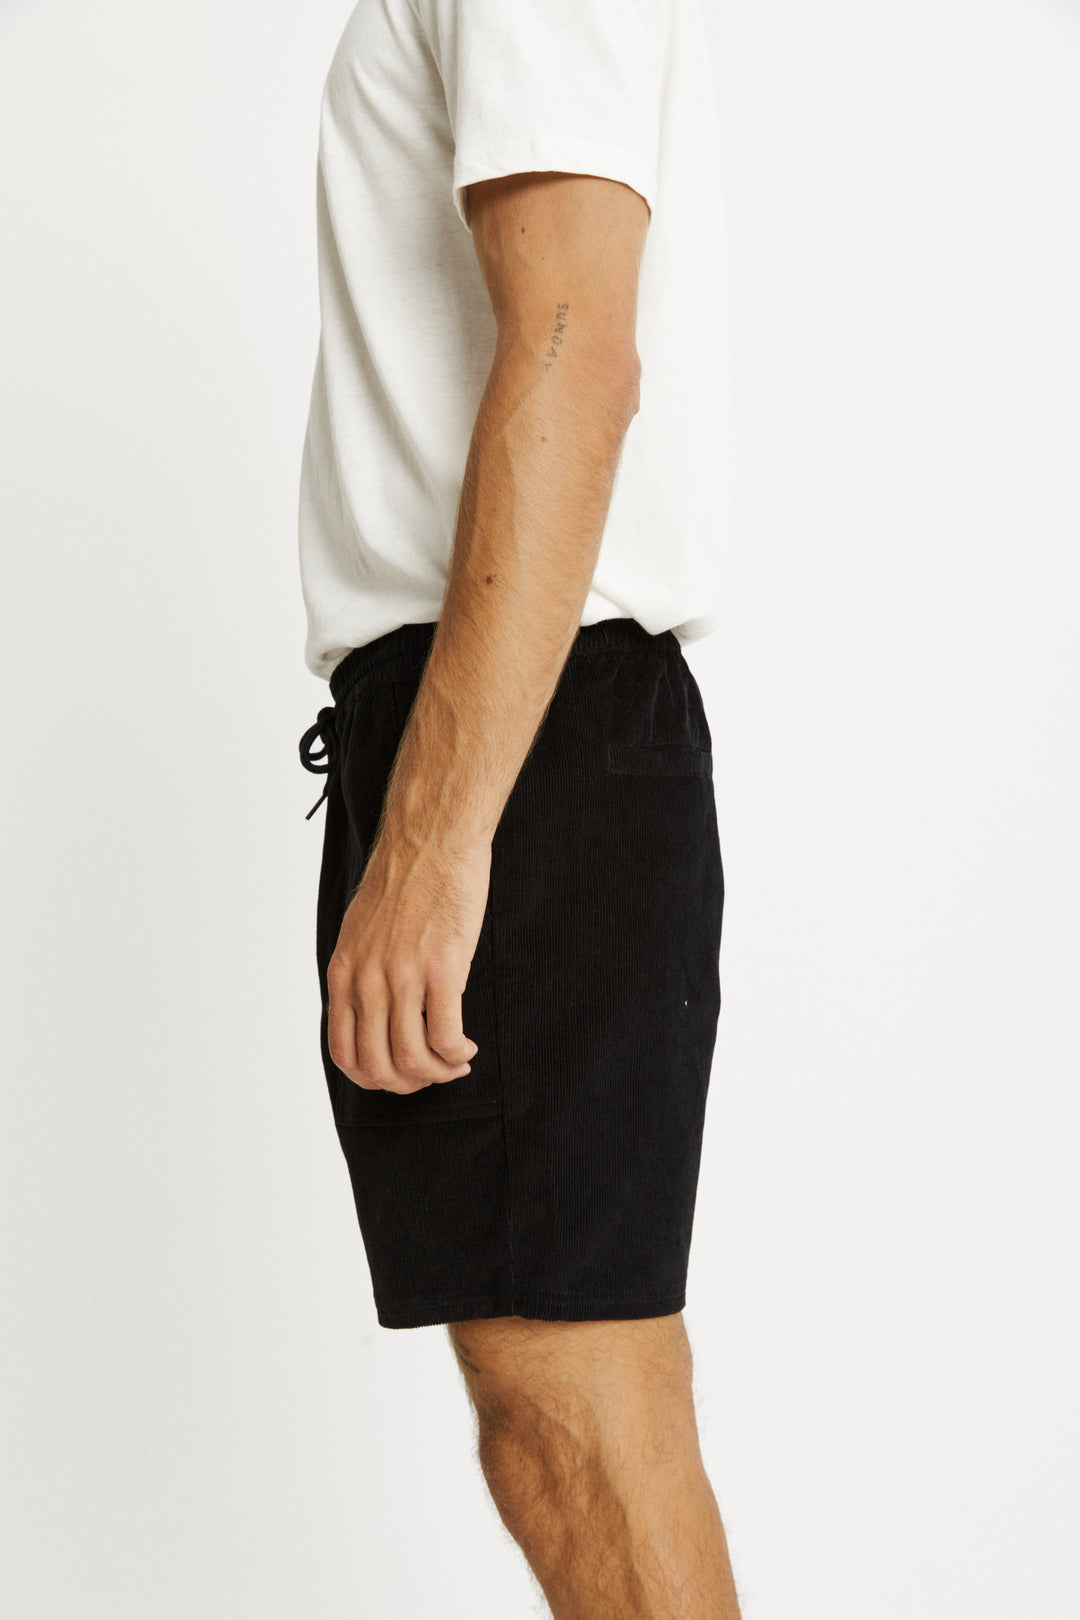 Mr Simple - Burbank Shorts in Black | Buster McGee Daylesford